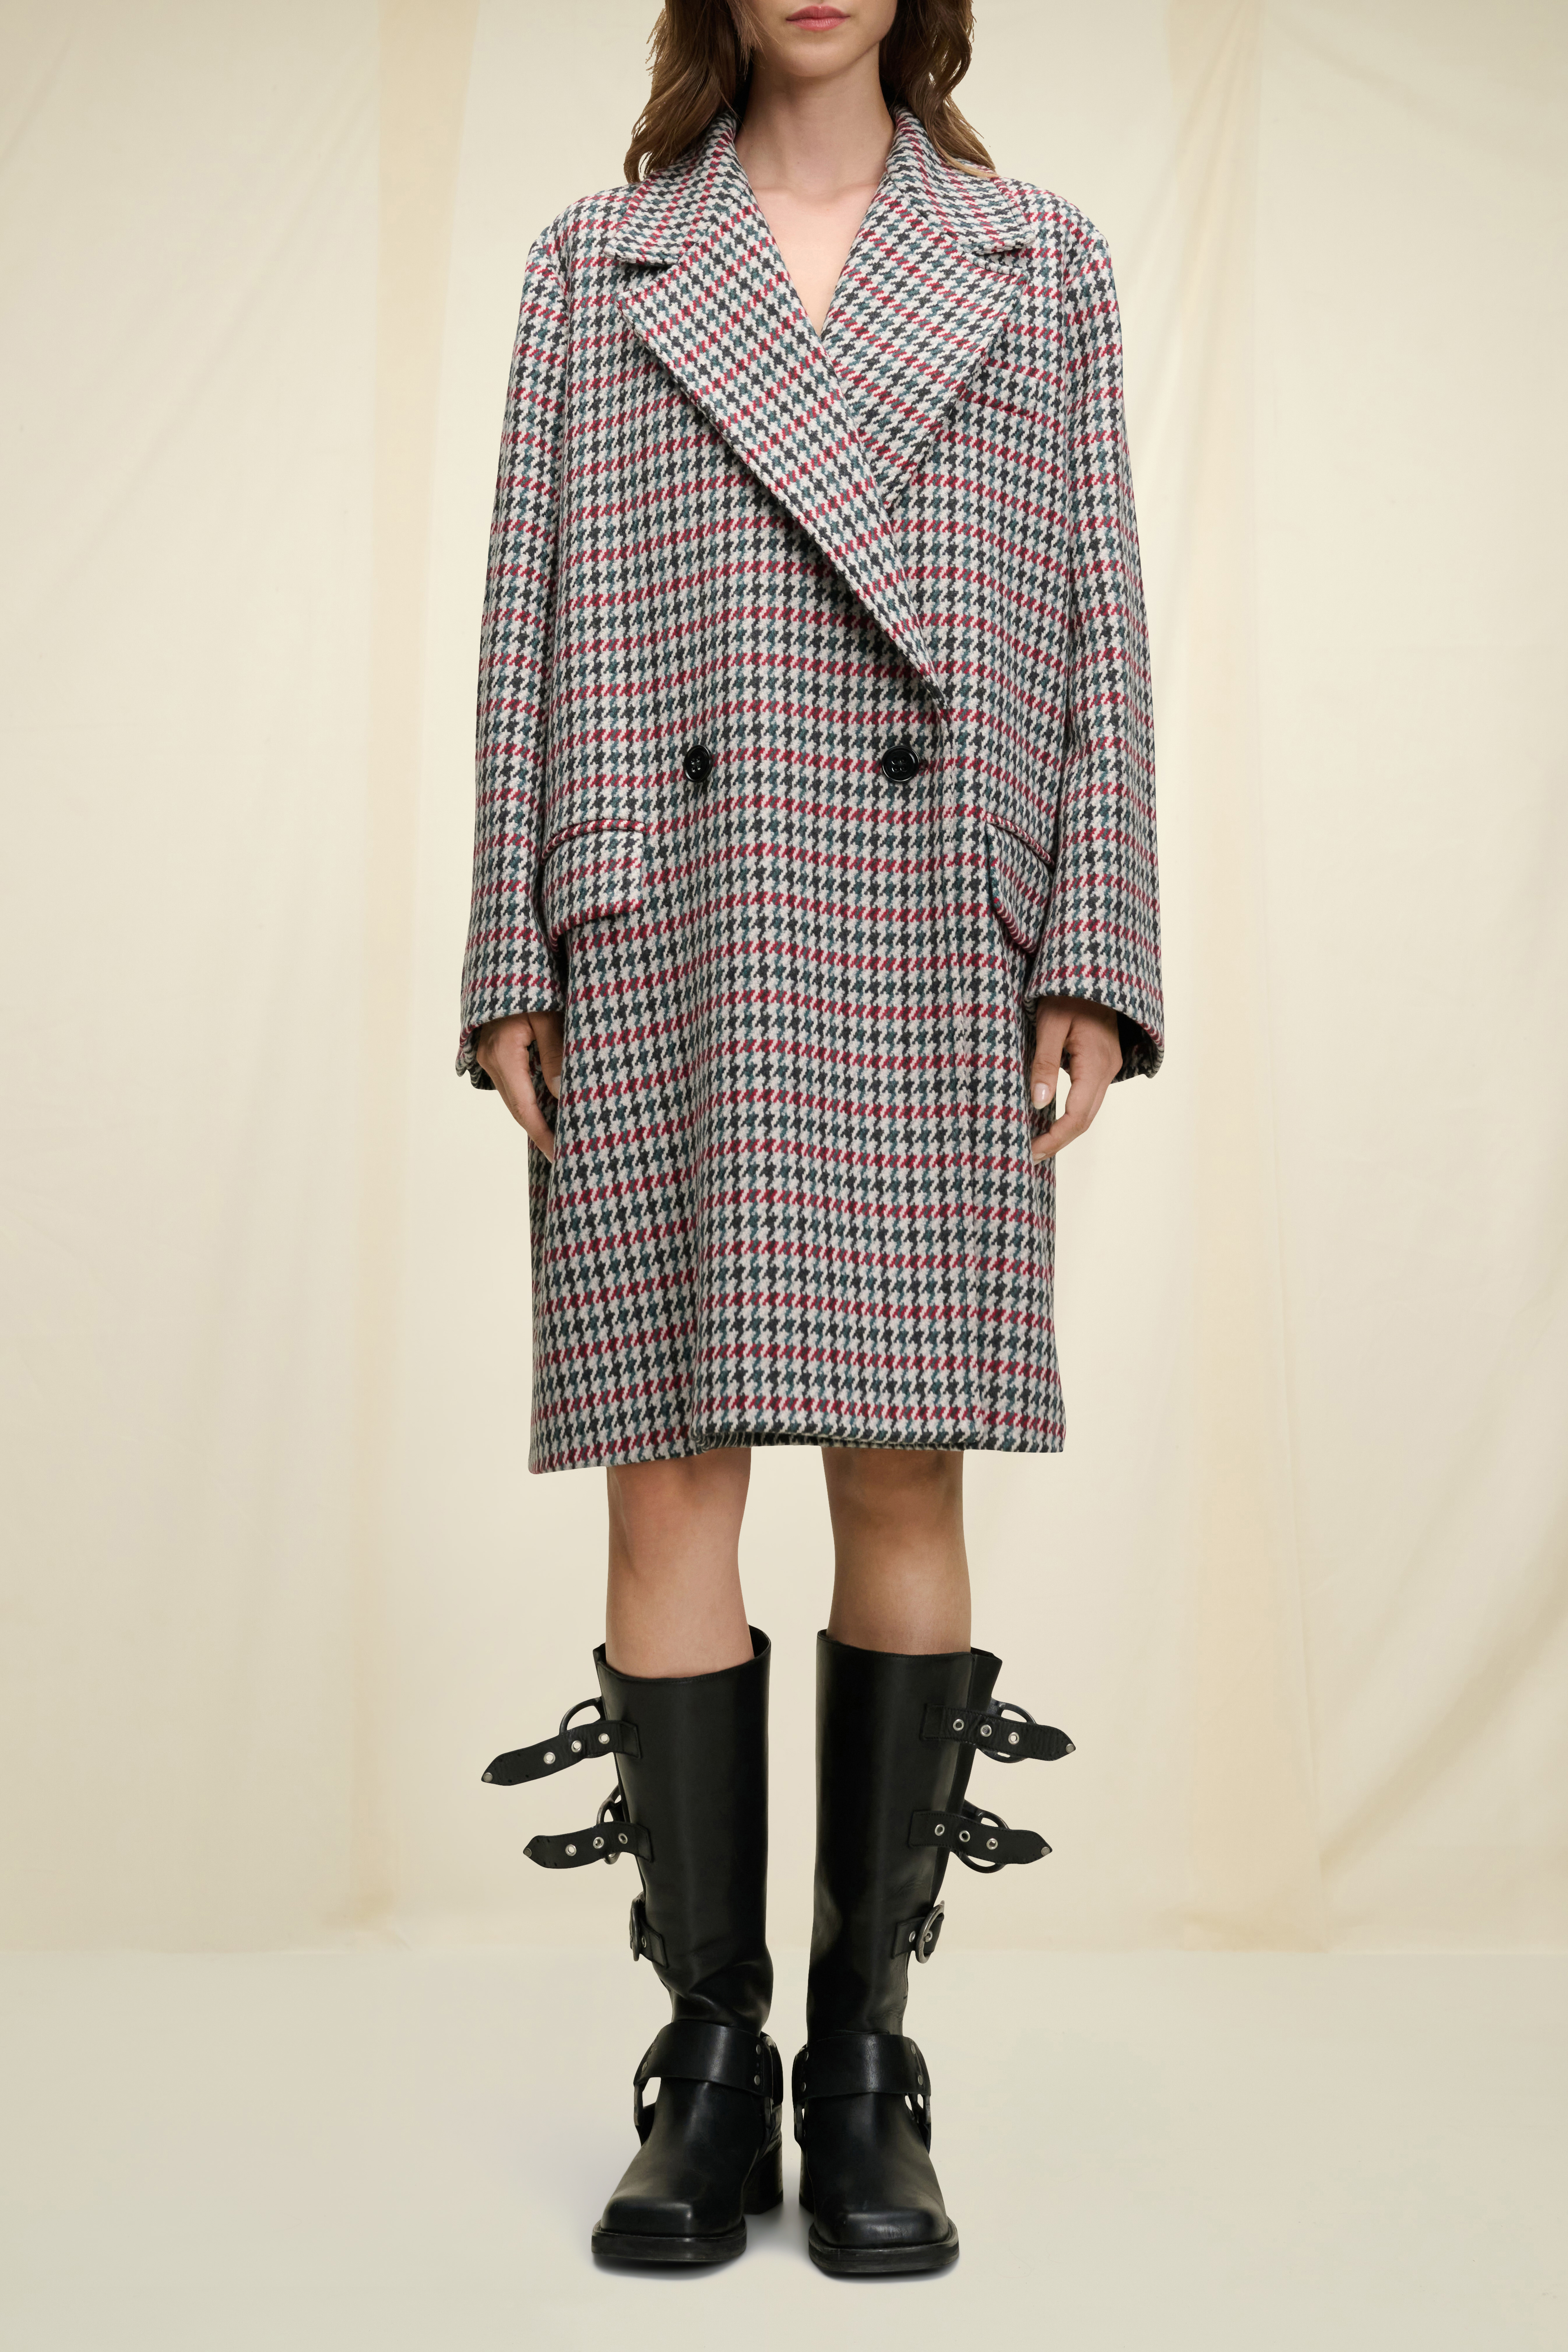 Dorothee Schumacher Coat with a houndstooth